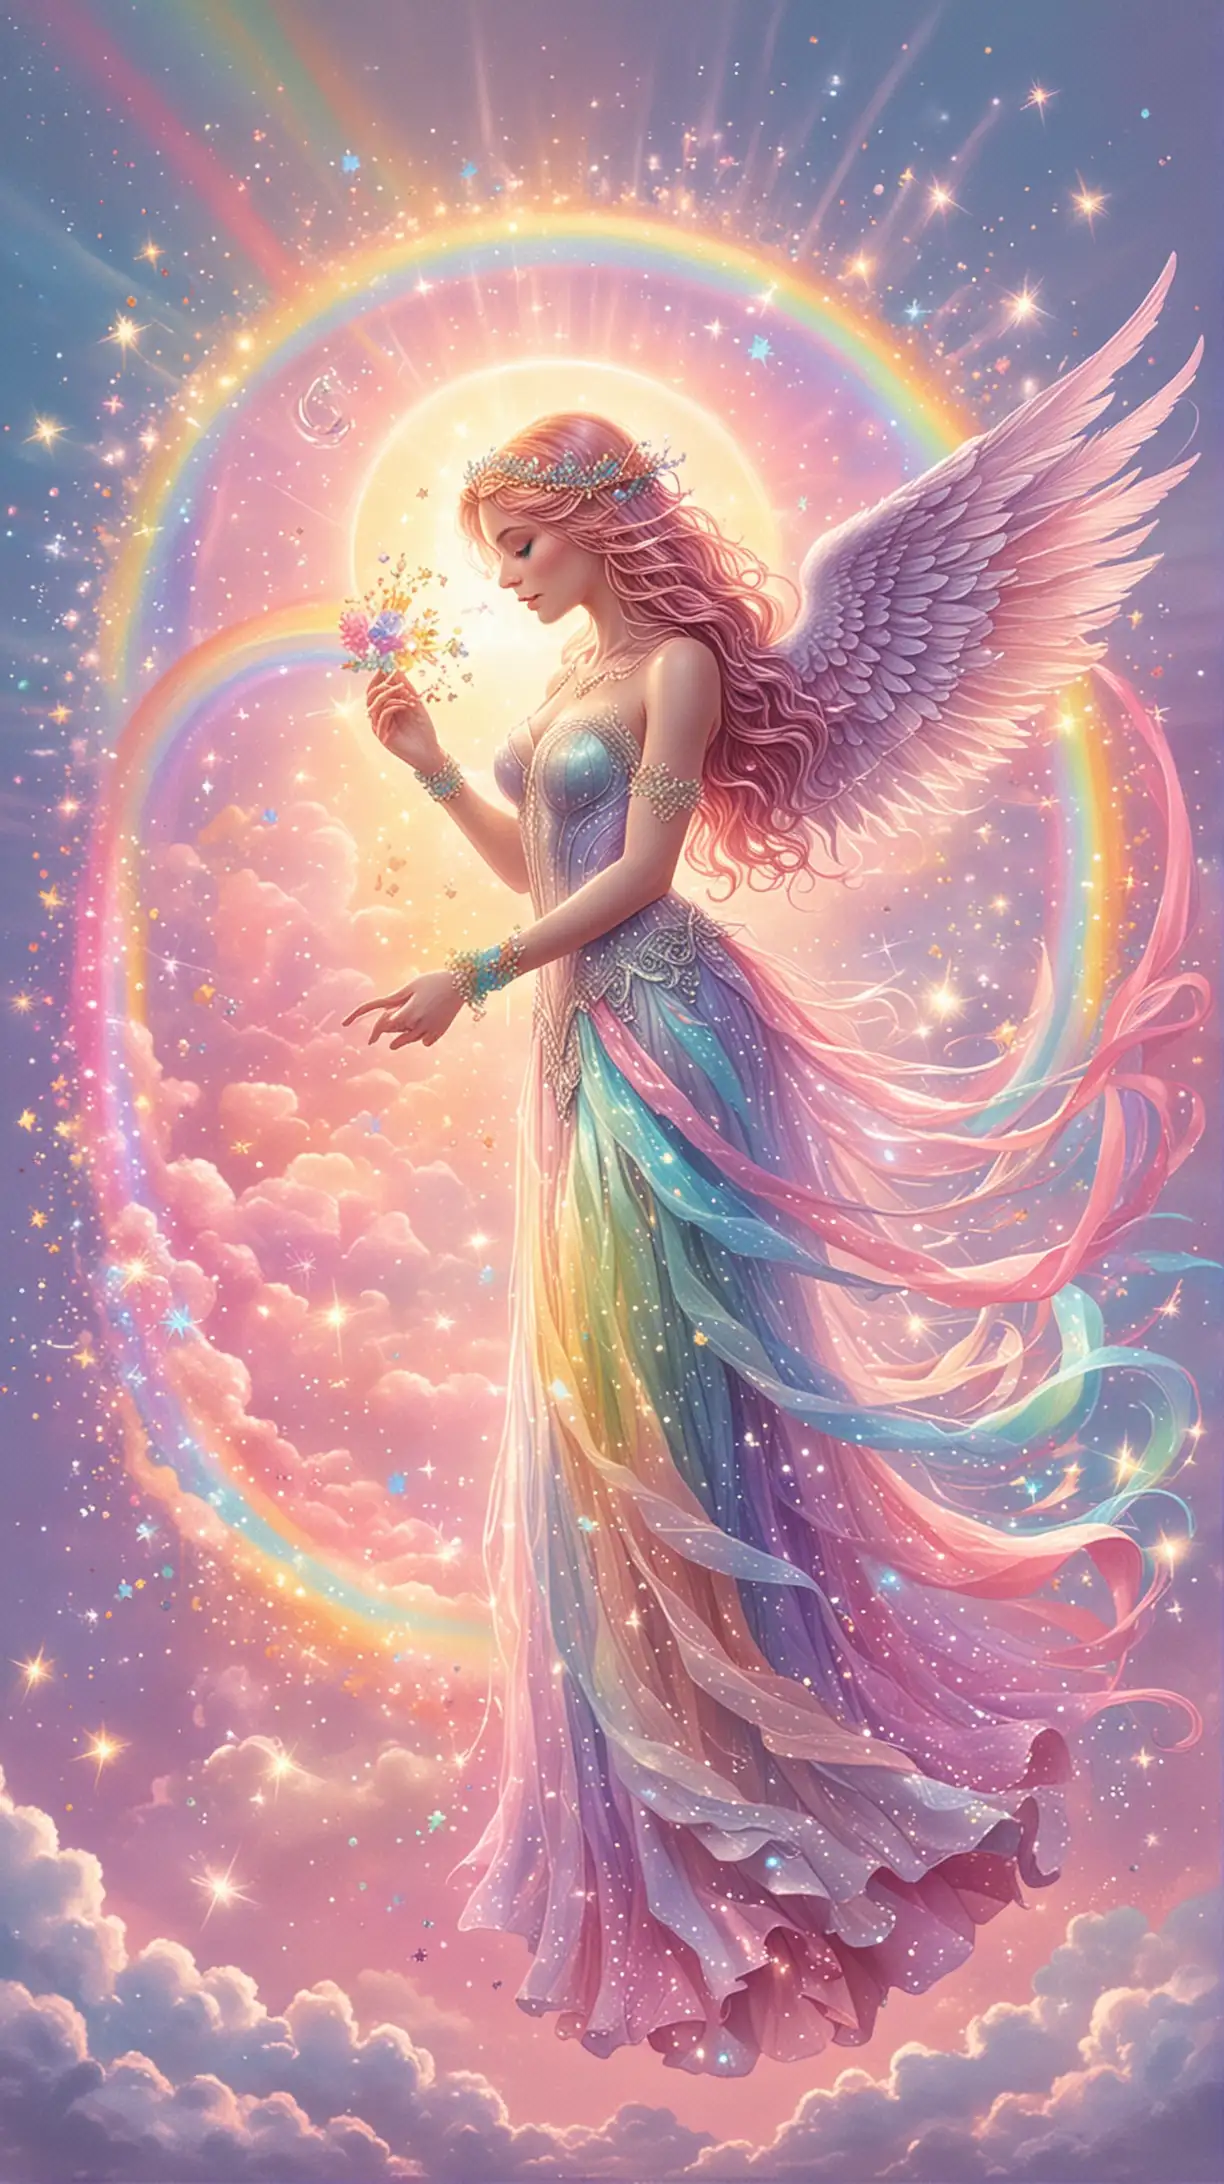 please create a pastel rainbow magical sparkly artwork that depicts how each individual is made of the divine and limitlessly worthy of love